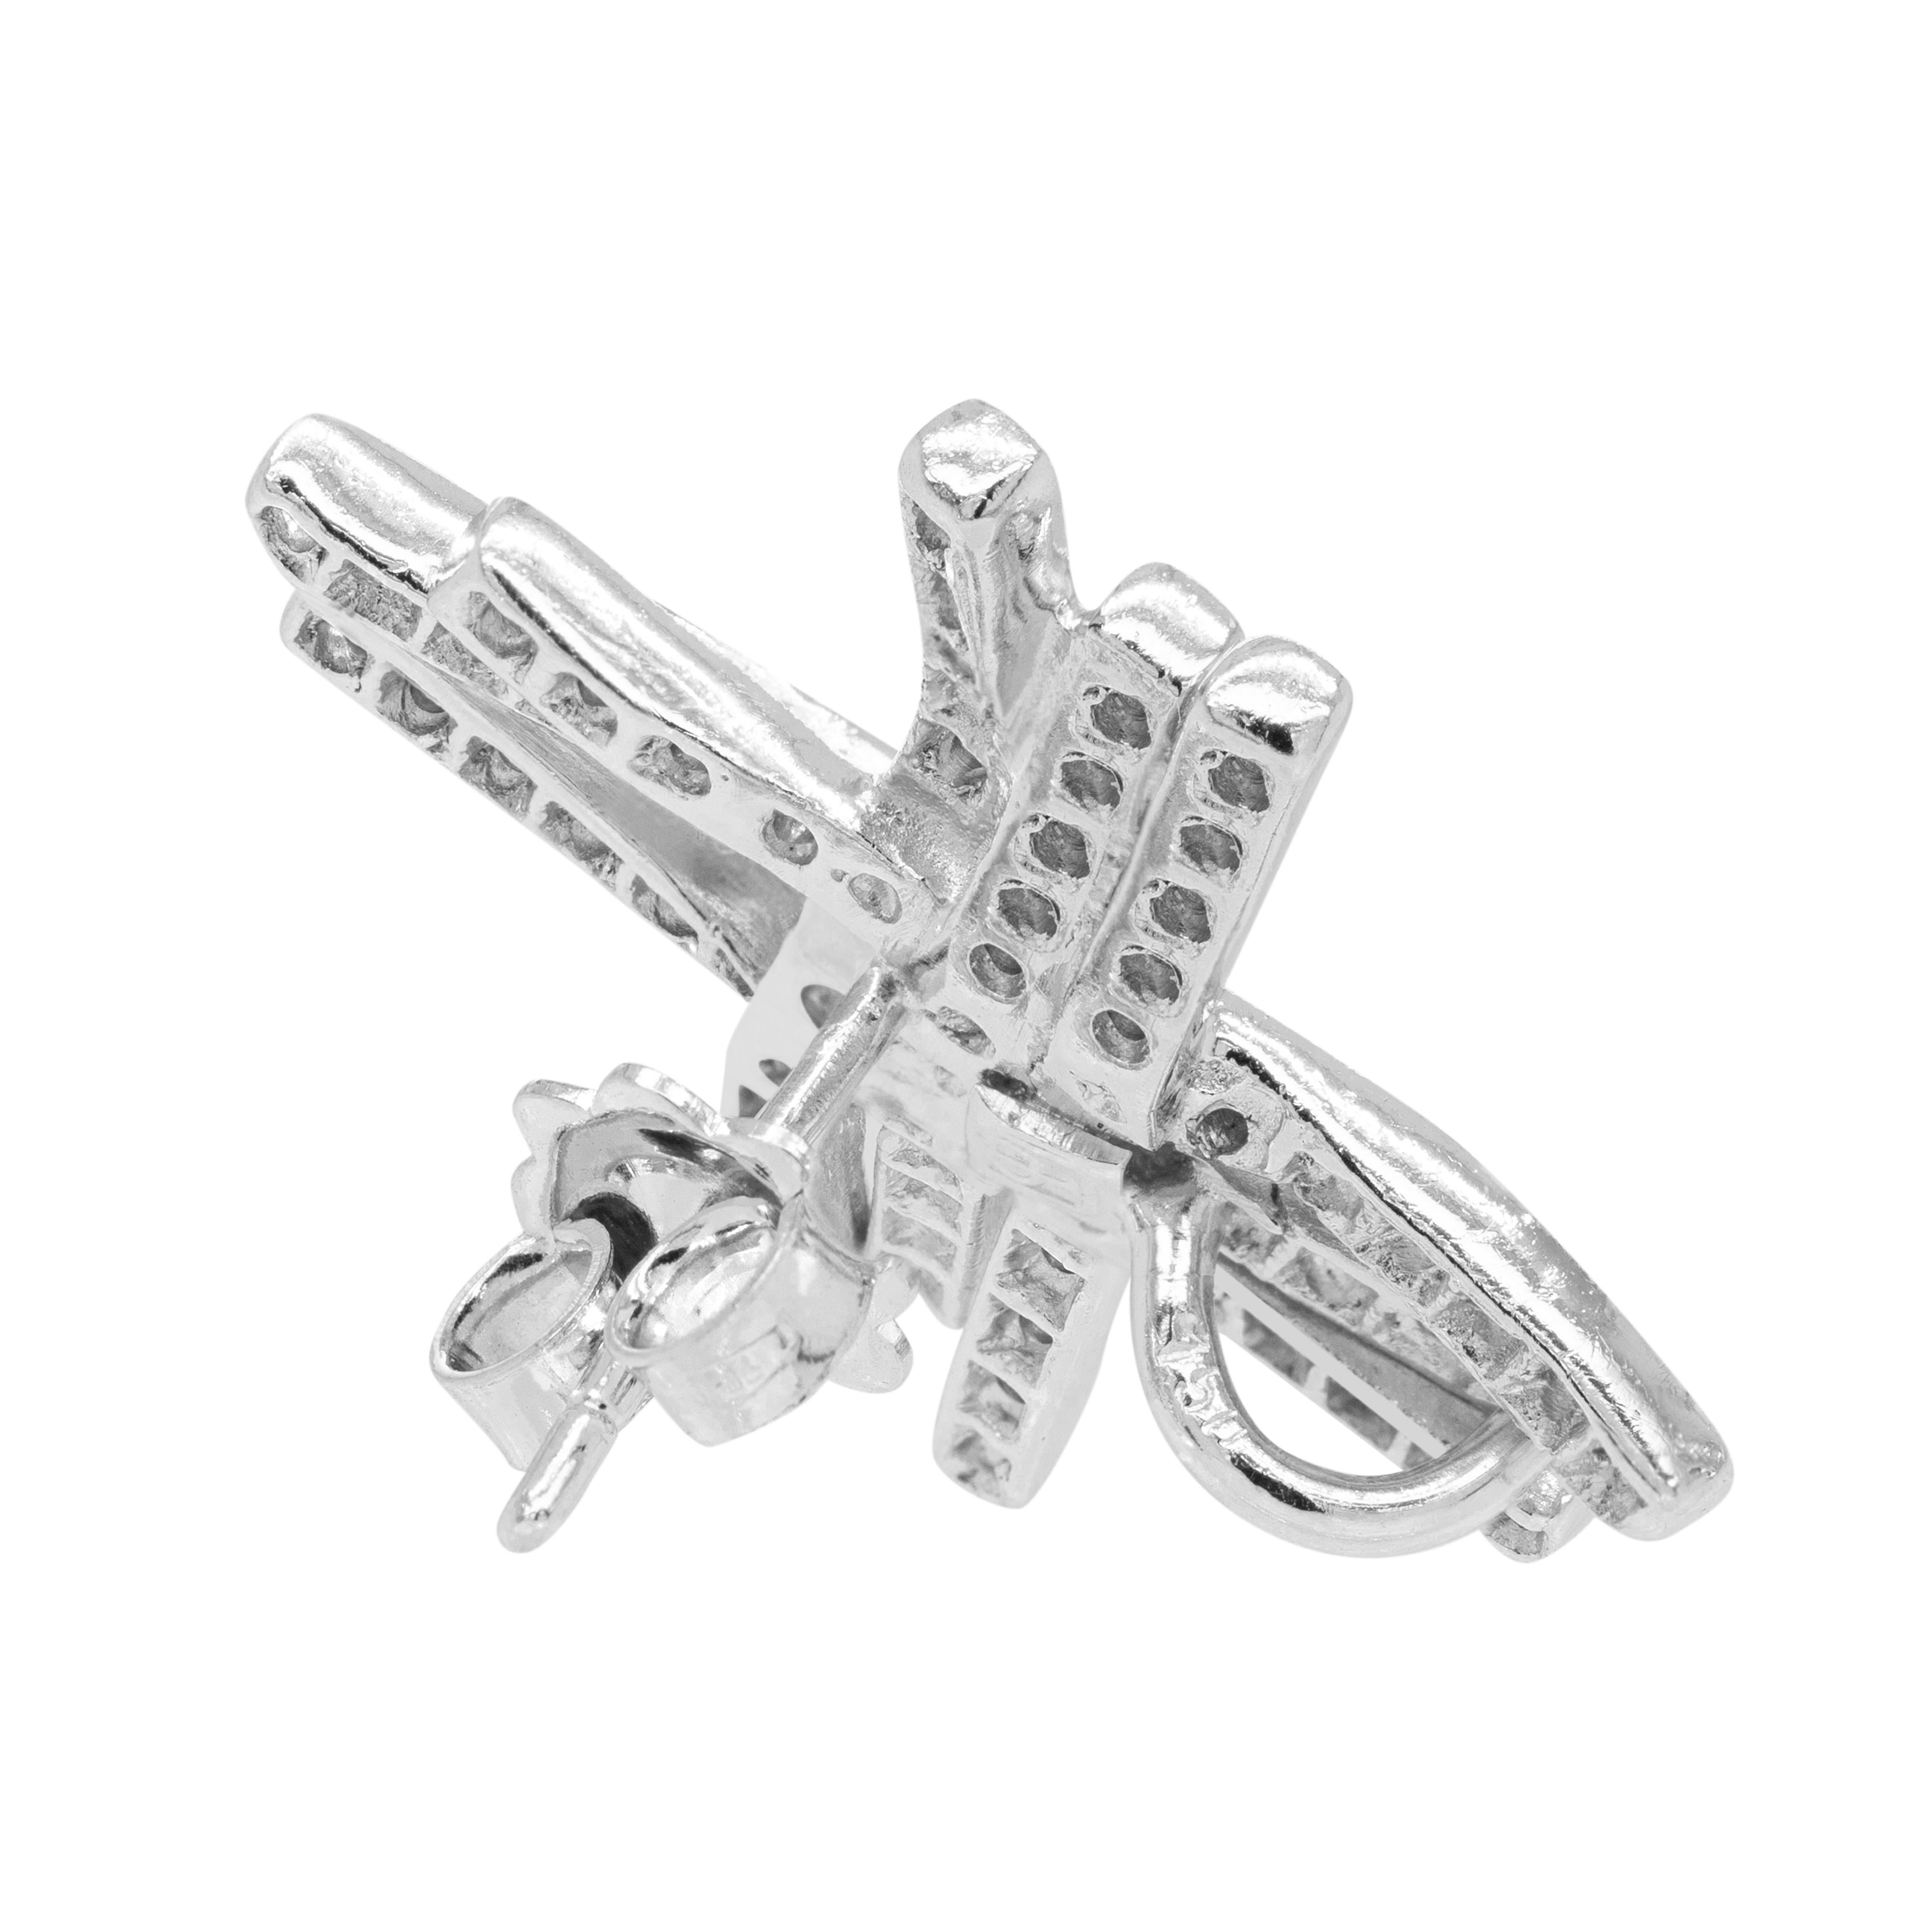 These beautiful 18 carat white gold stud earrings feature an abstract design, composed of six thin asymmetrical ribbons grouped into sets of three and braided together in the middle to create overlapping cross motifs. 

The delicate ribbons are